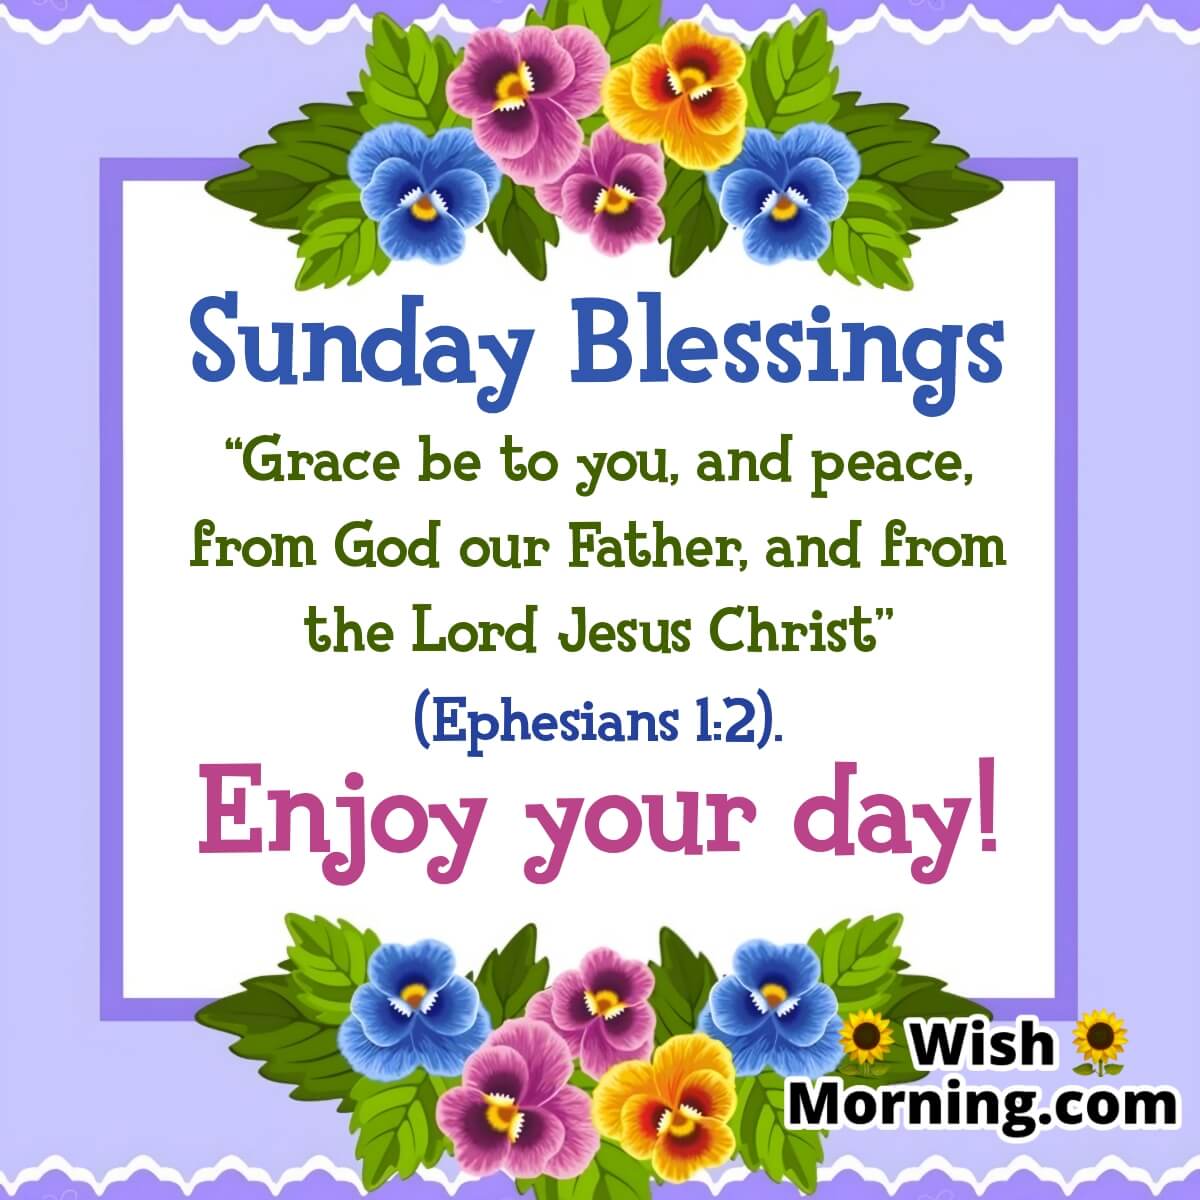 happy sunday blessings